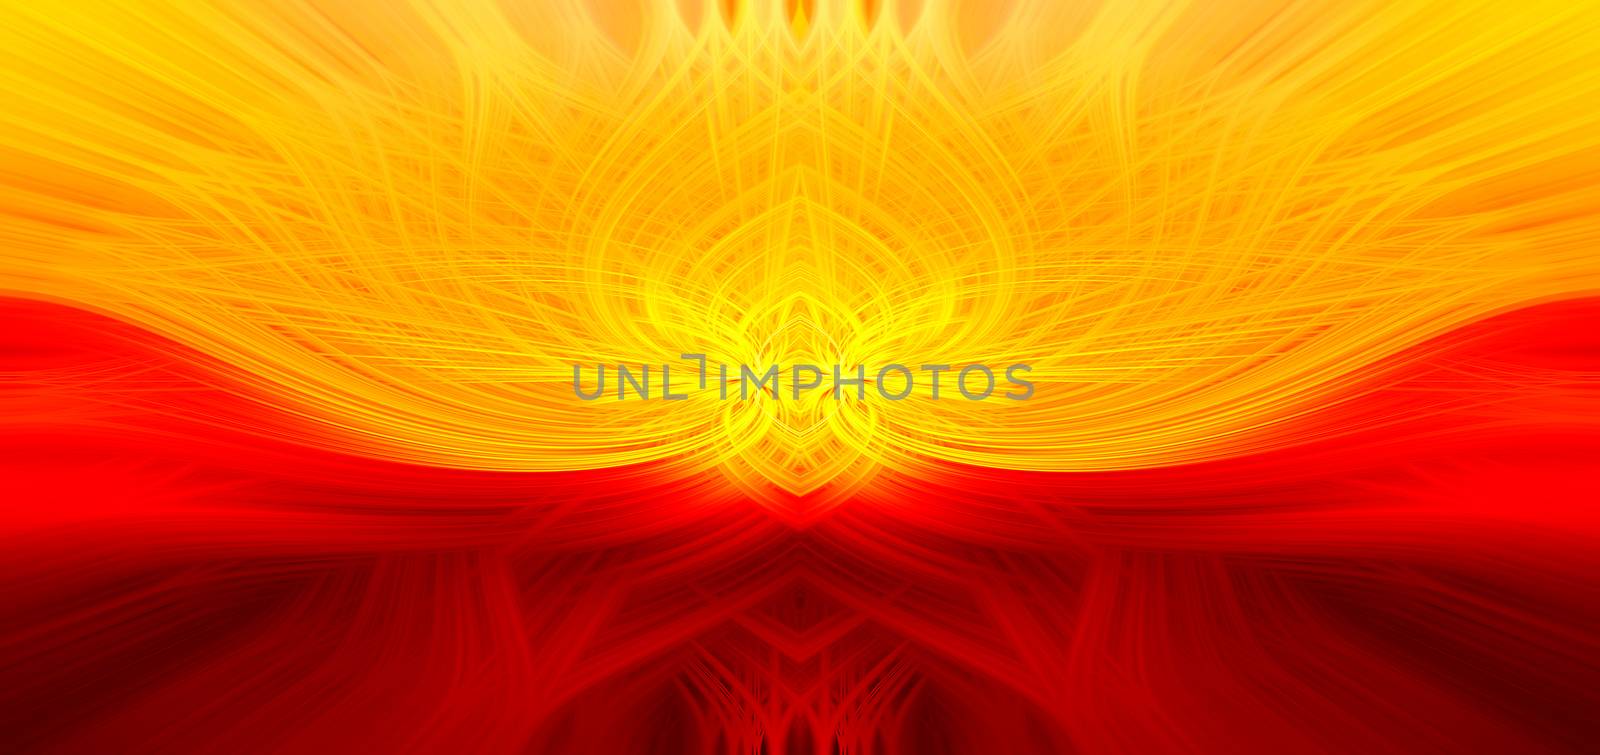 Beautiful abstract intertwined 3d fibers forming a shape of sparkle, flame, flower, interlinked hearts or magical creature. Yellow and red colors. Illustration.